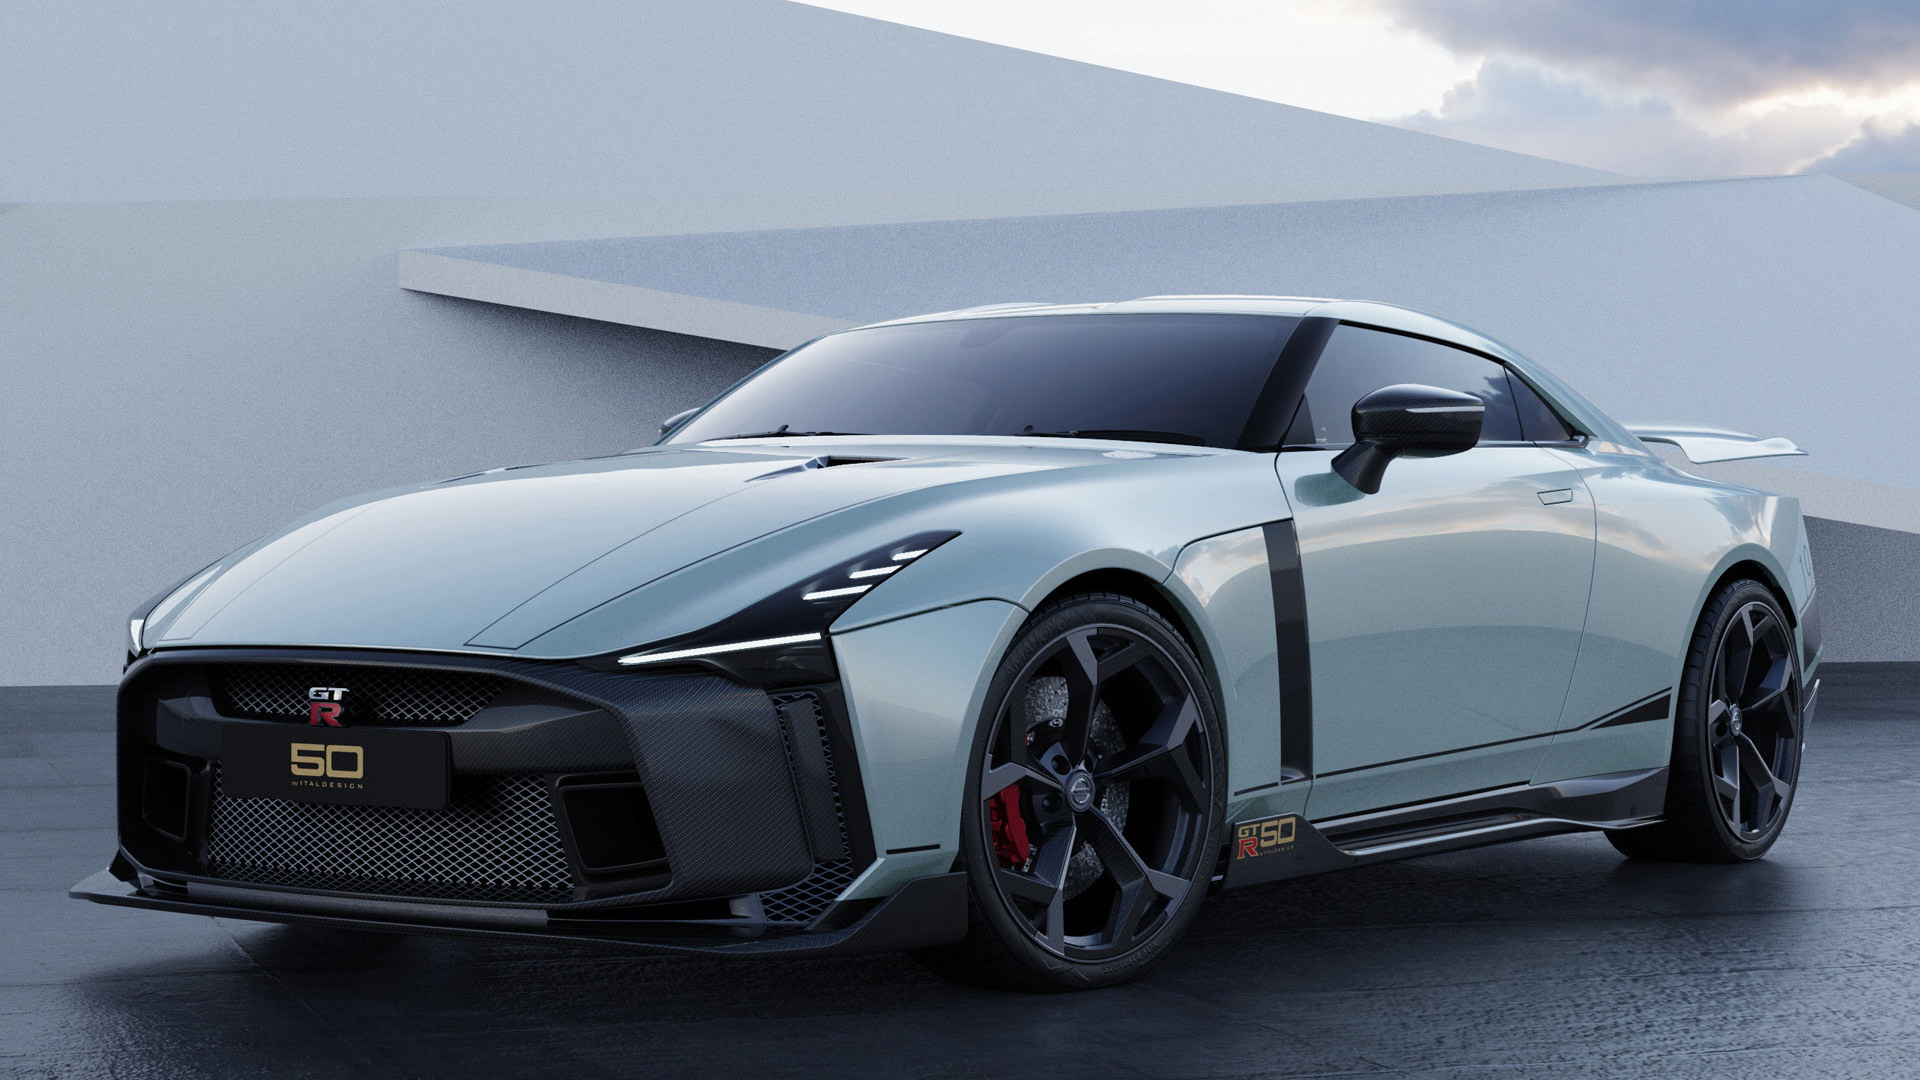 First production example of $1.1M Nissan GT-R50 by Italdesign revealedFirst production example of $1.1M Nissan GT-R50 by Italdesign revealed